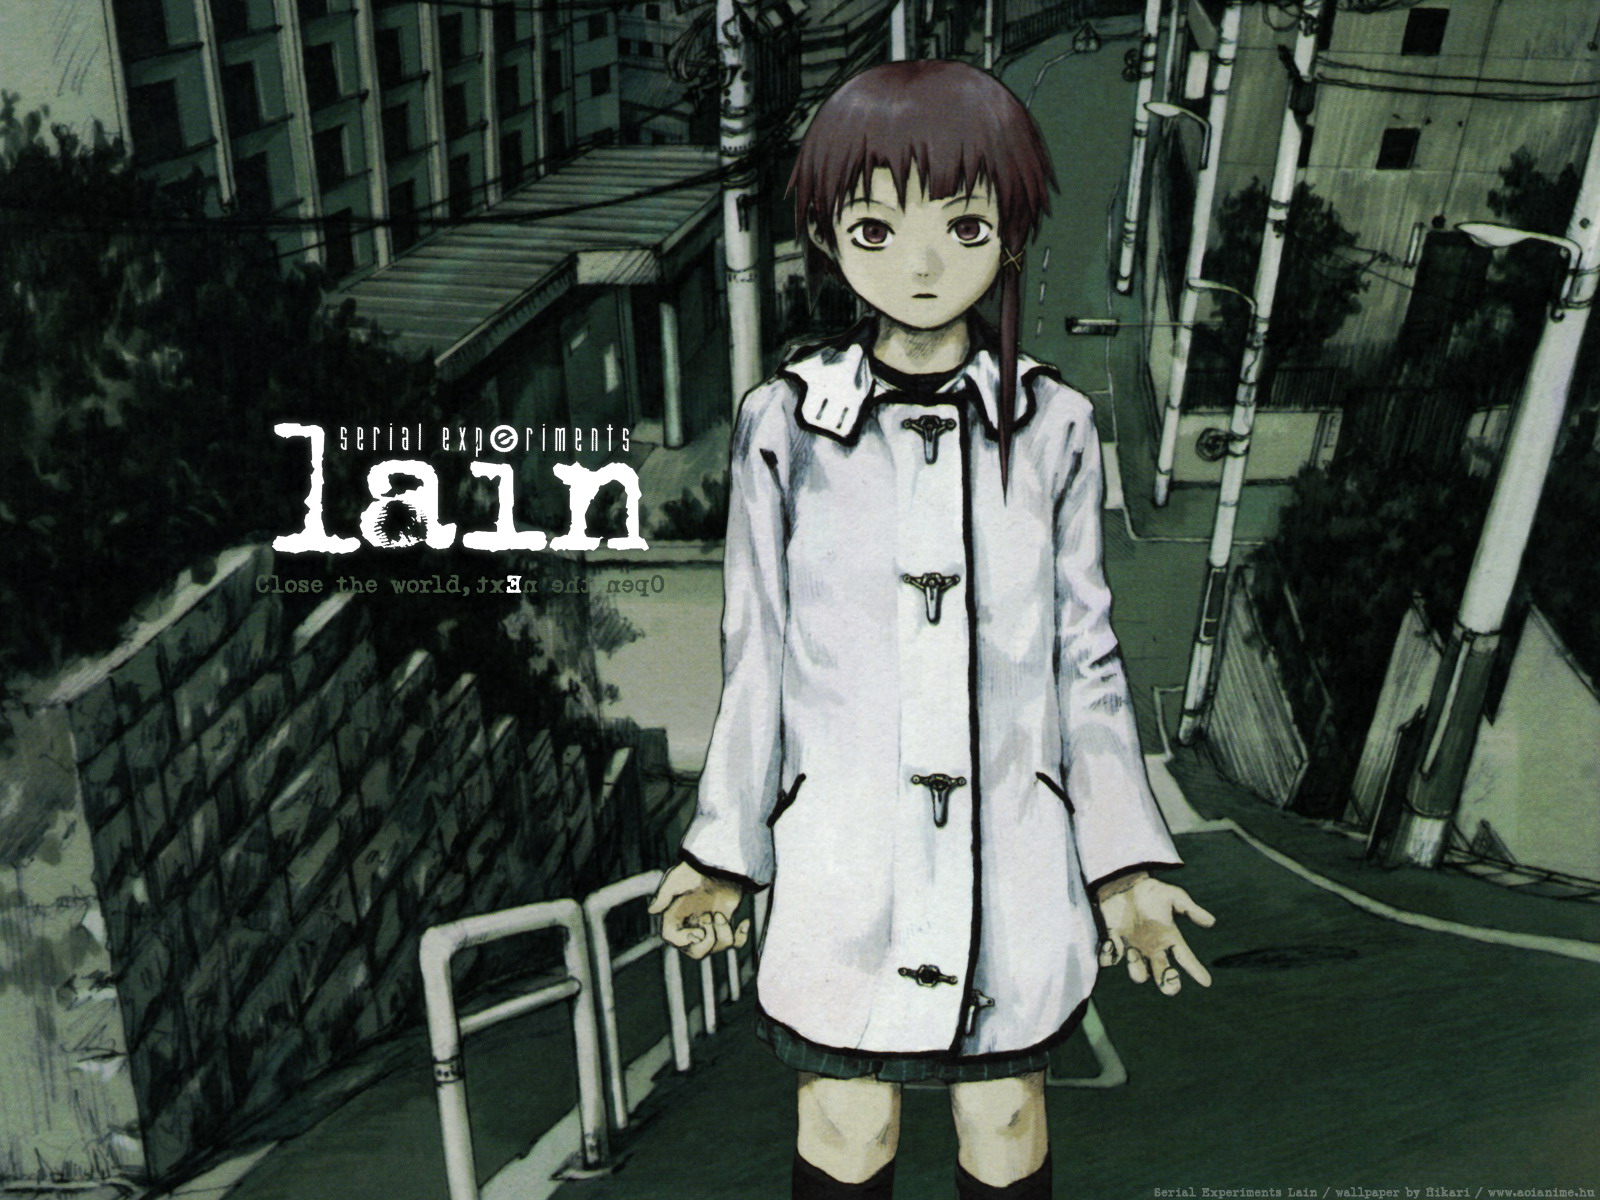 Serial Experiments Lain English Dub Torrent Download